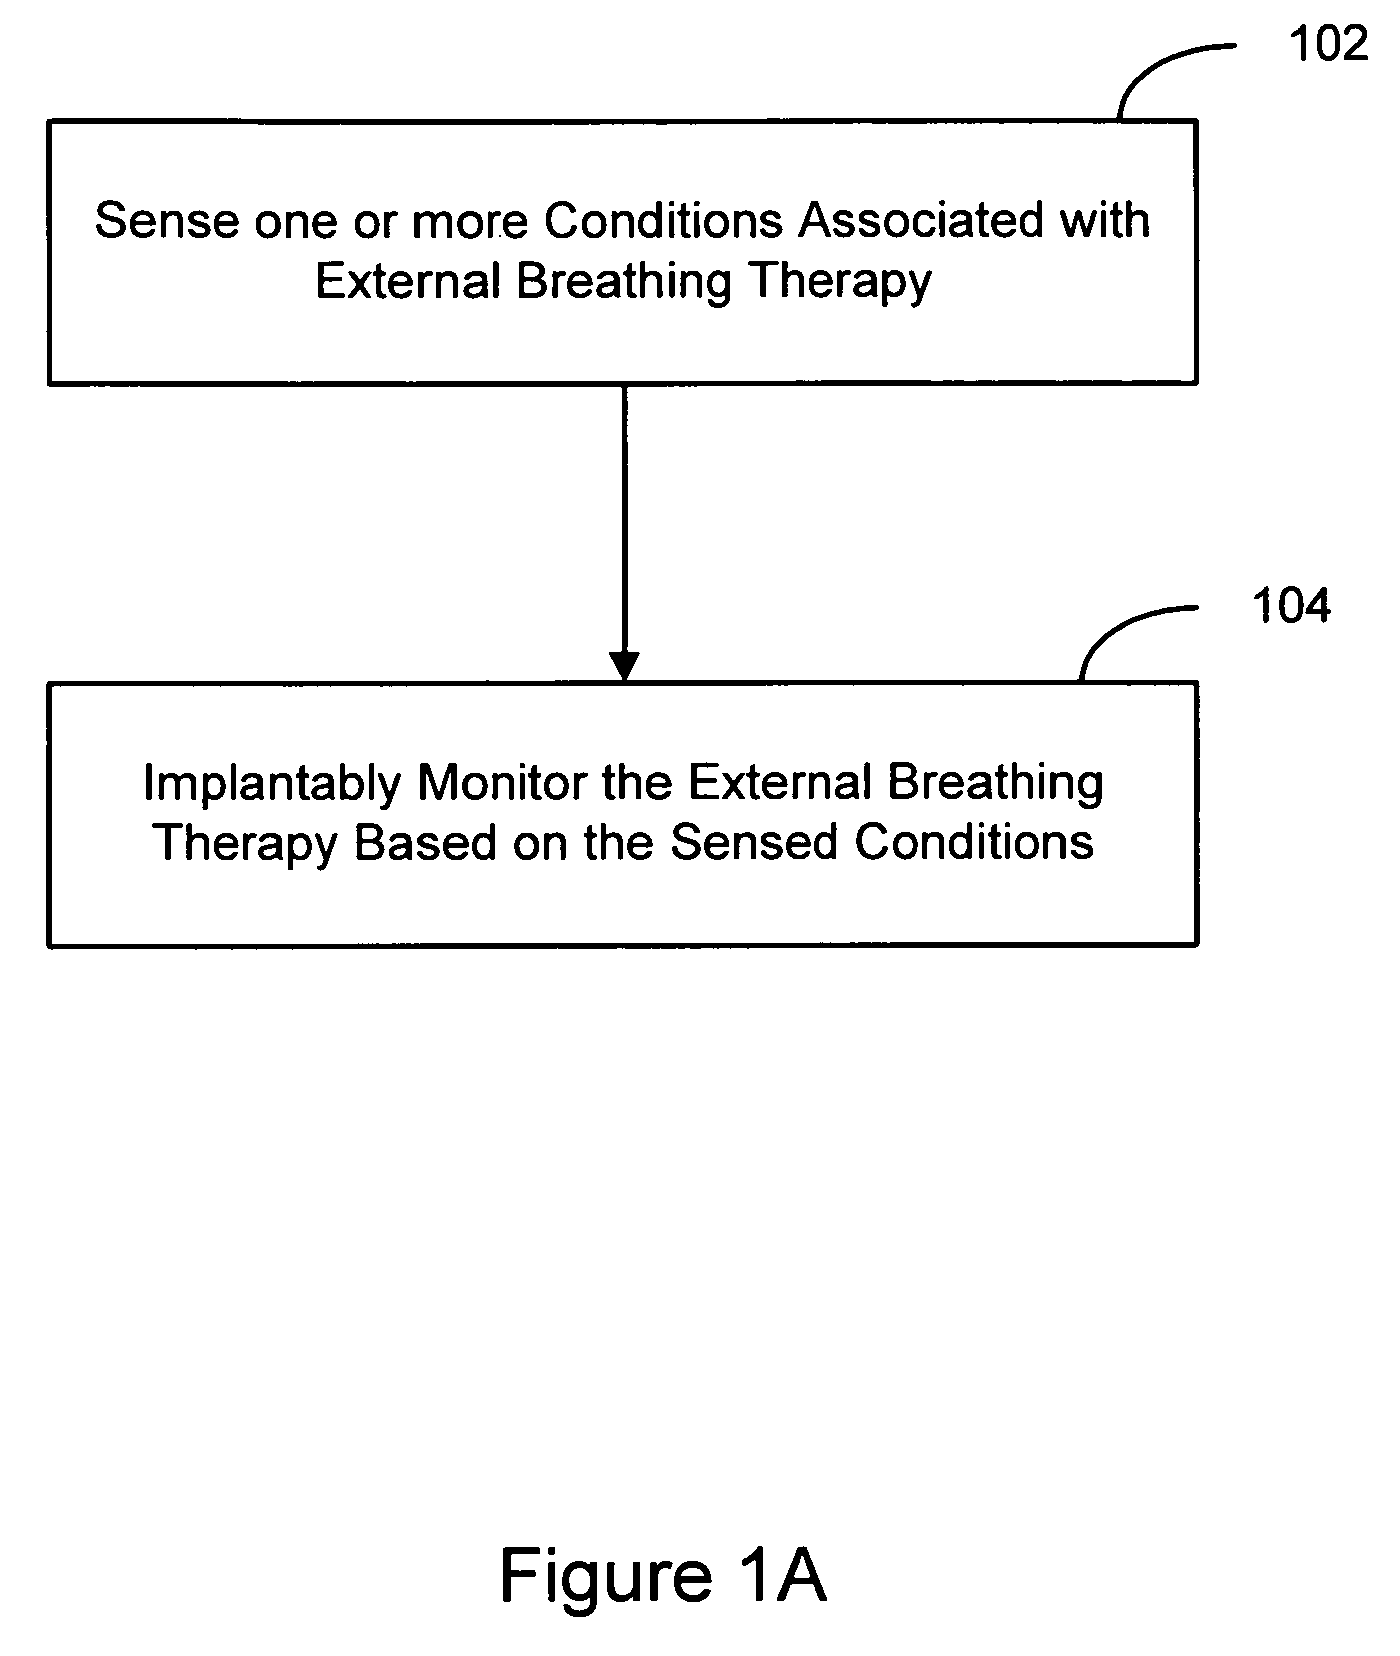 Methods and systems for implantably monitoring external breathing therapy